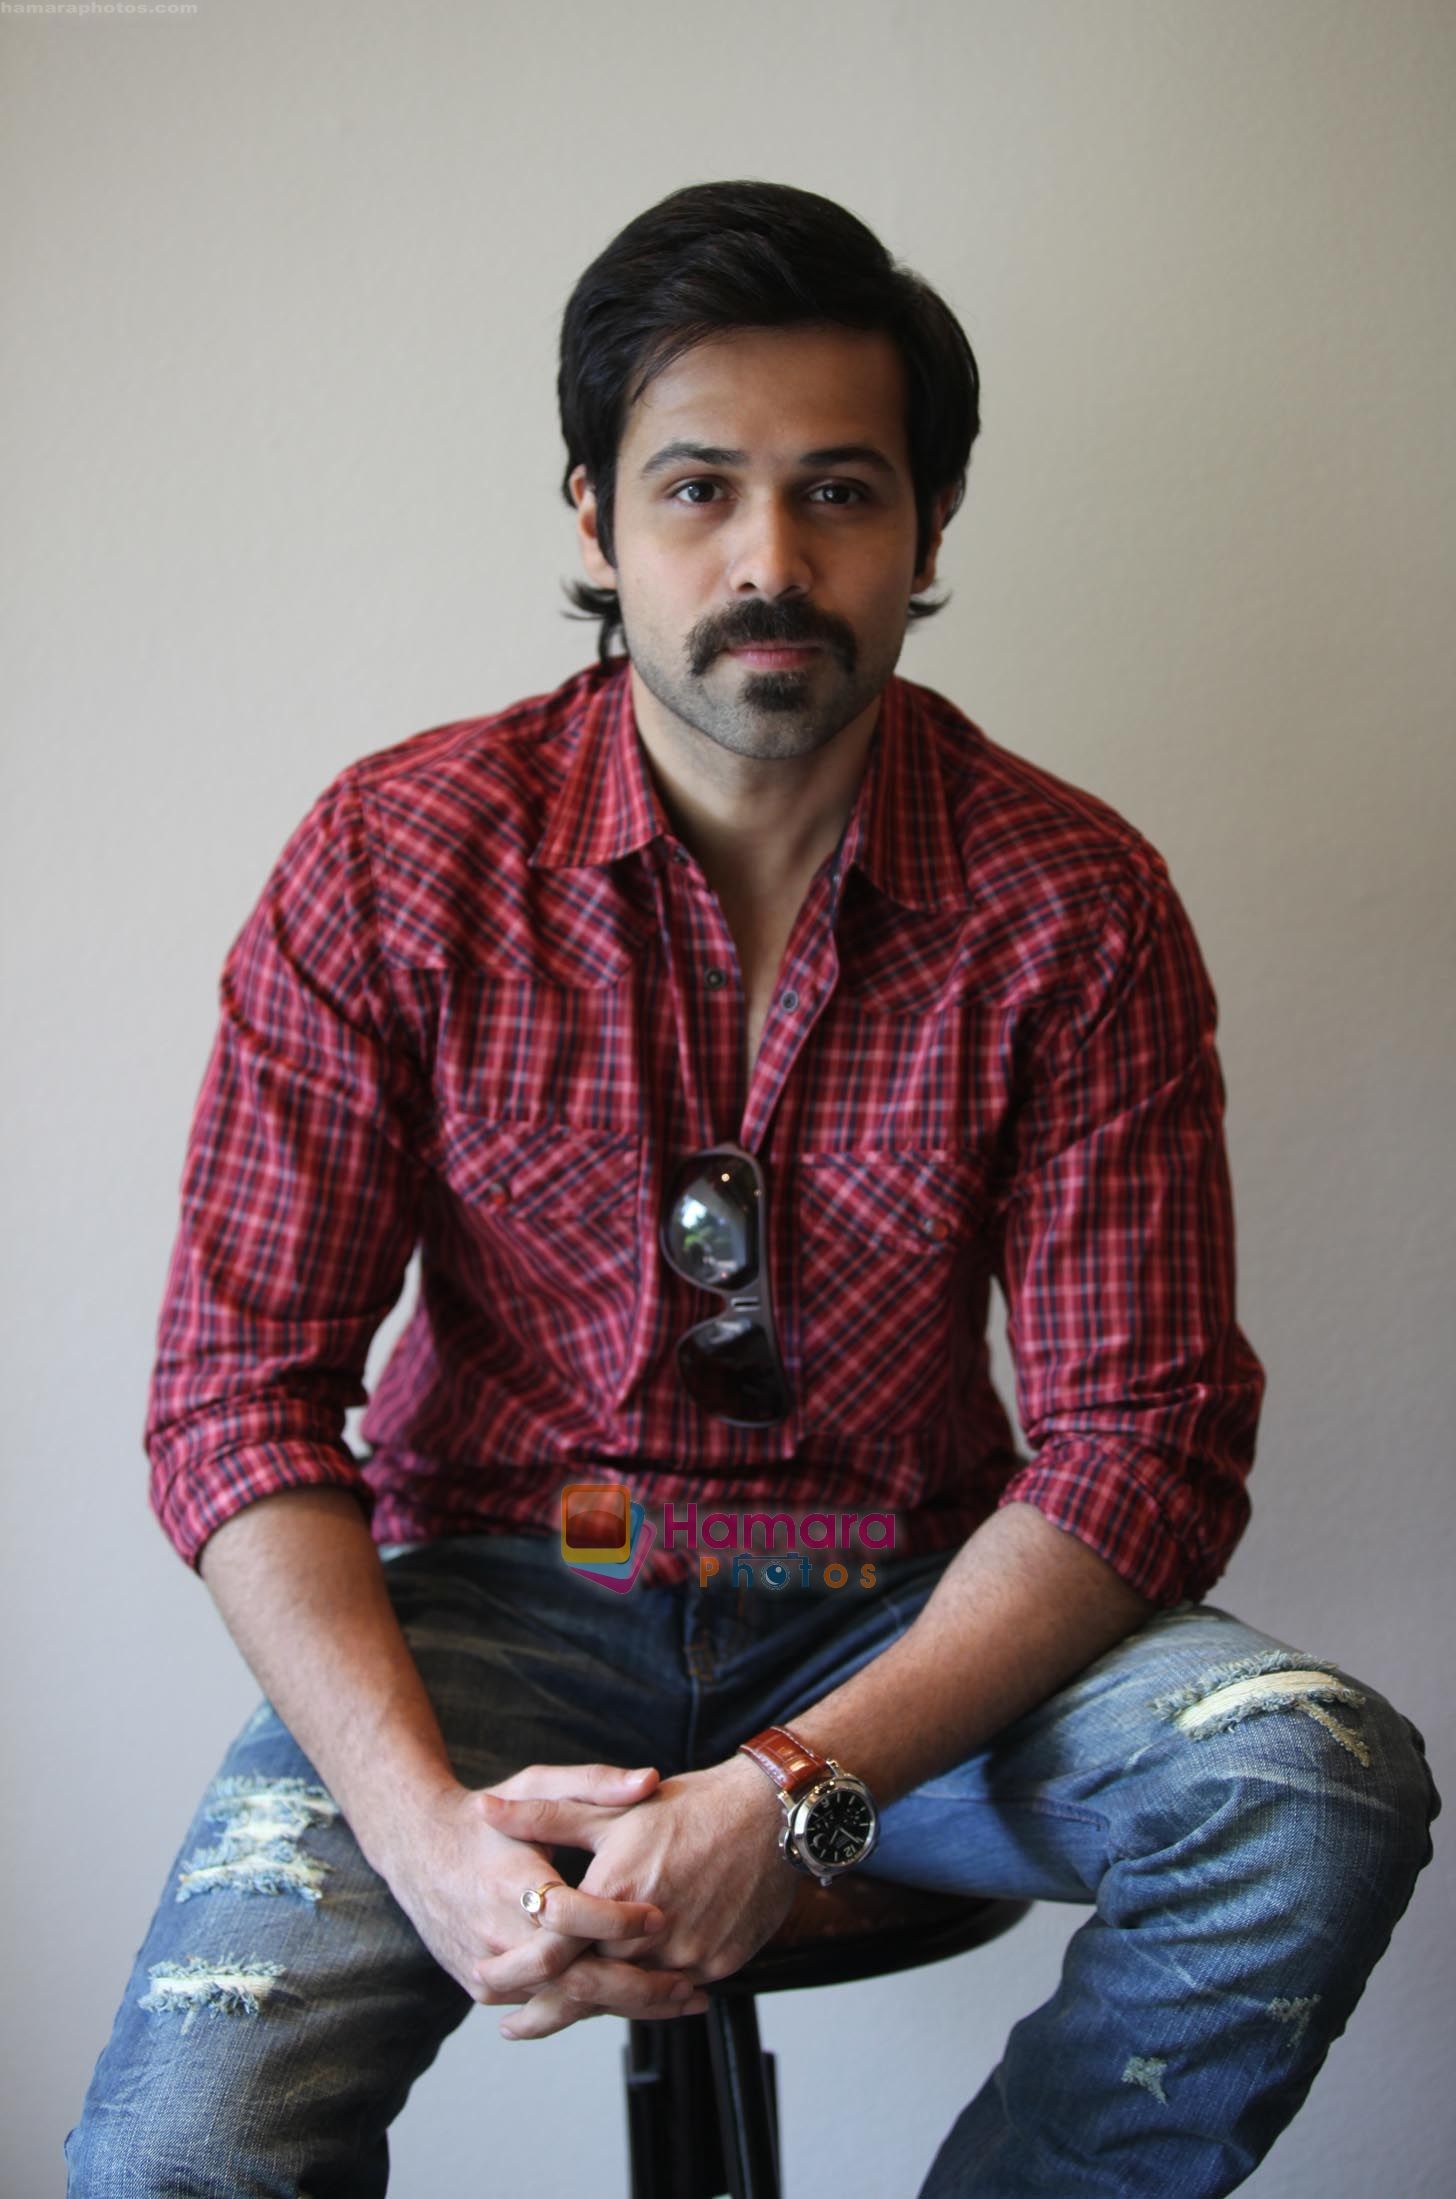 50 Emraan Hashmi Cool Images And HD Wallpapers 